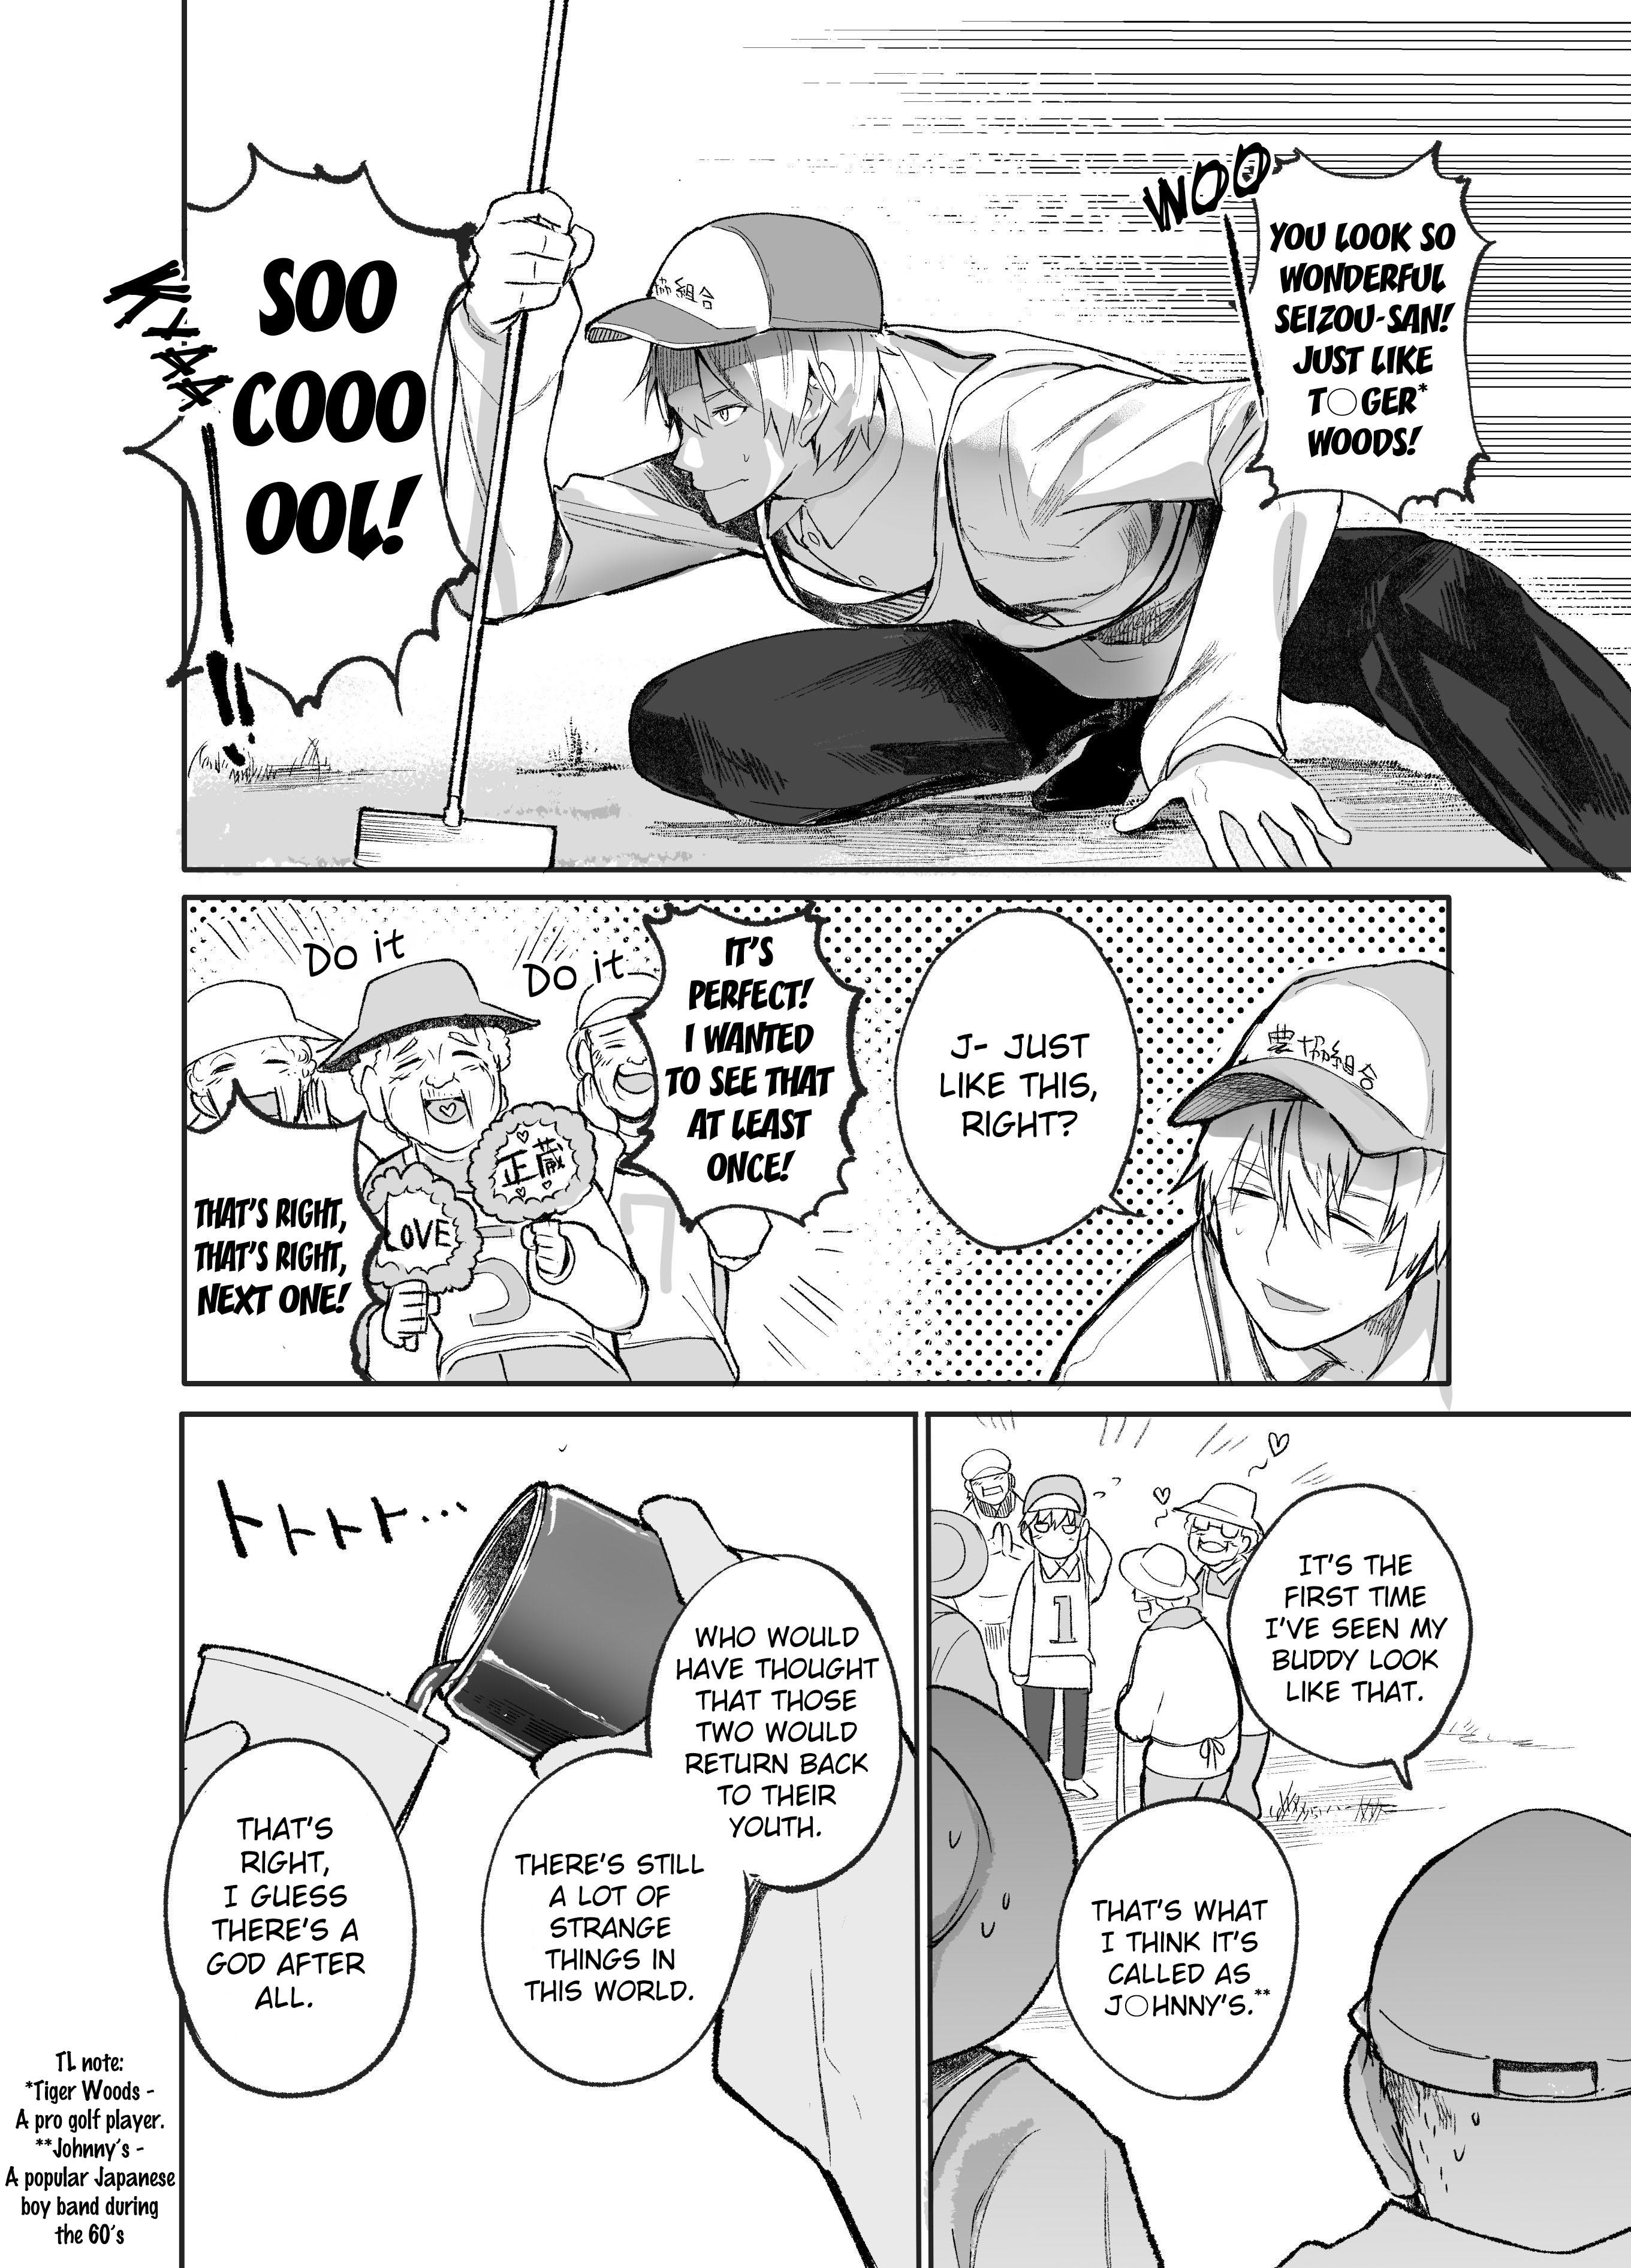 Read A Story About A Grandpa And Grandma Who Returned Back To Their Youth Chapter 3 On Mangakakalot